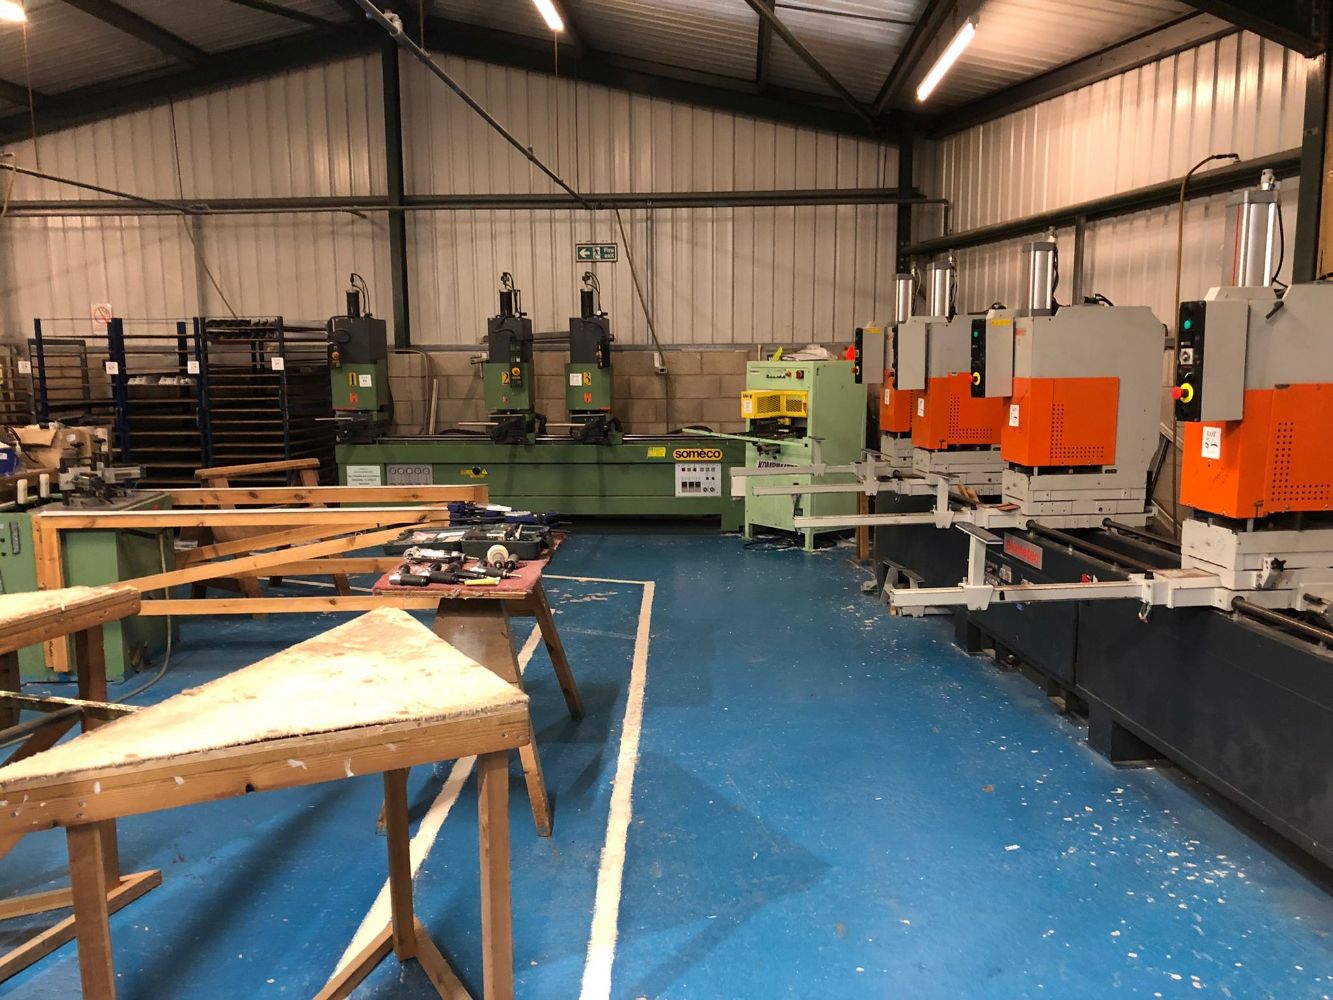 Online Auction - A&D Joinery Limited